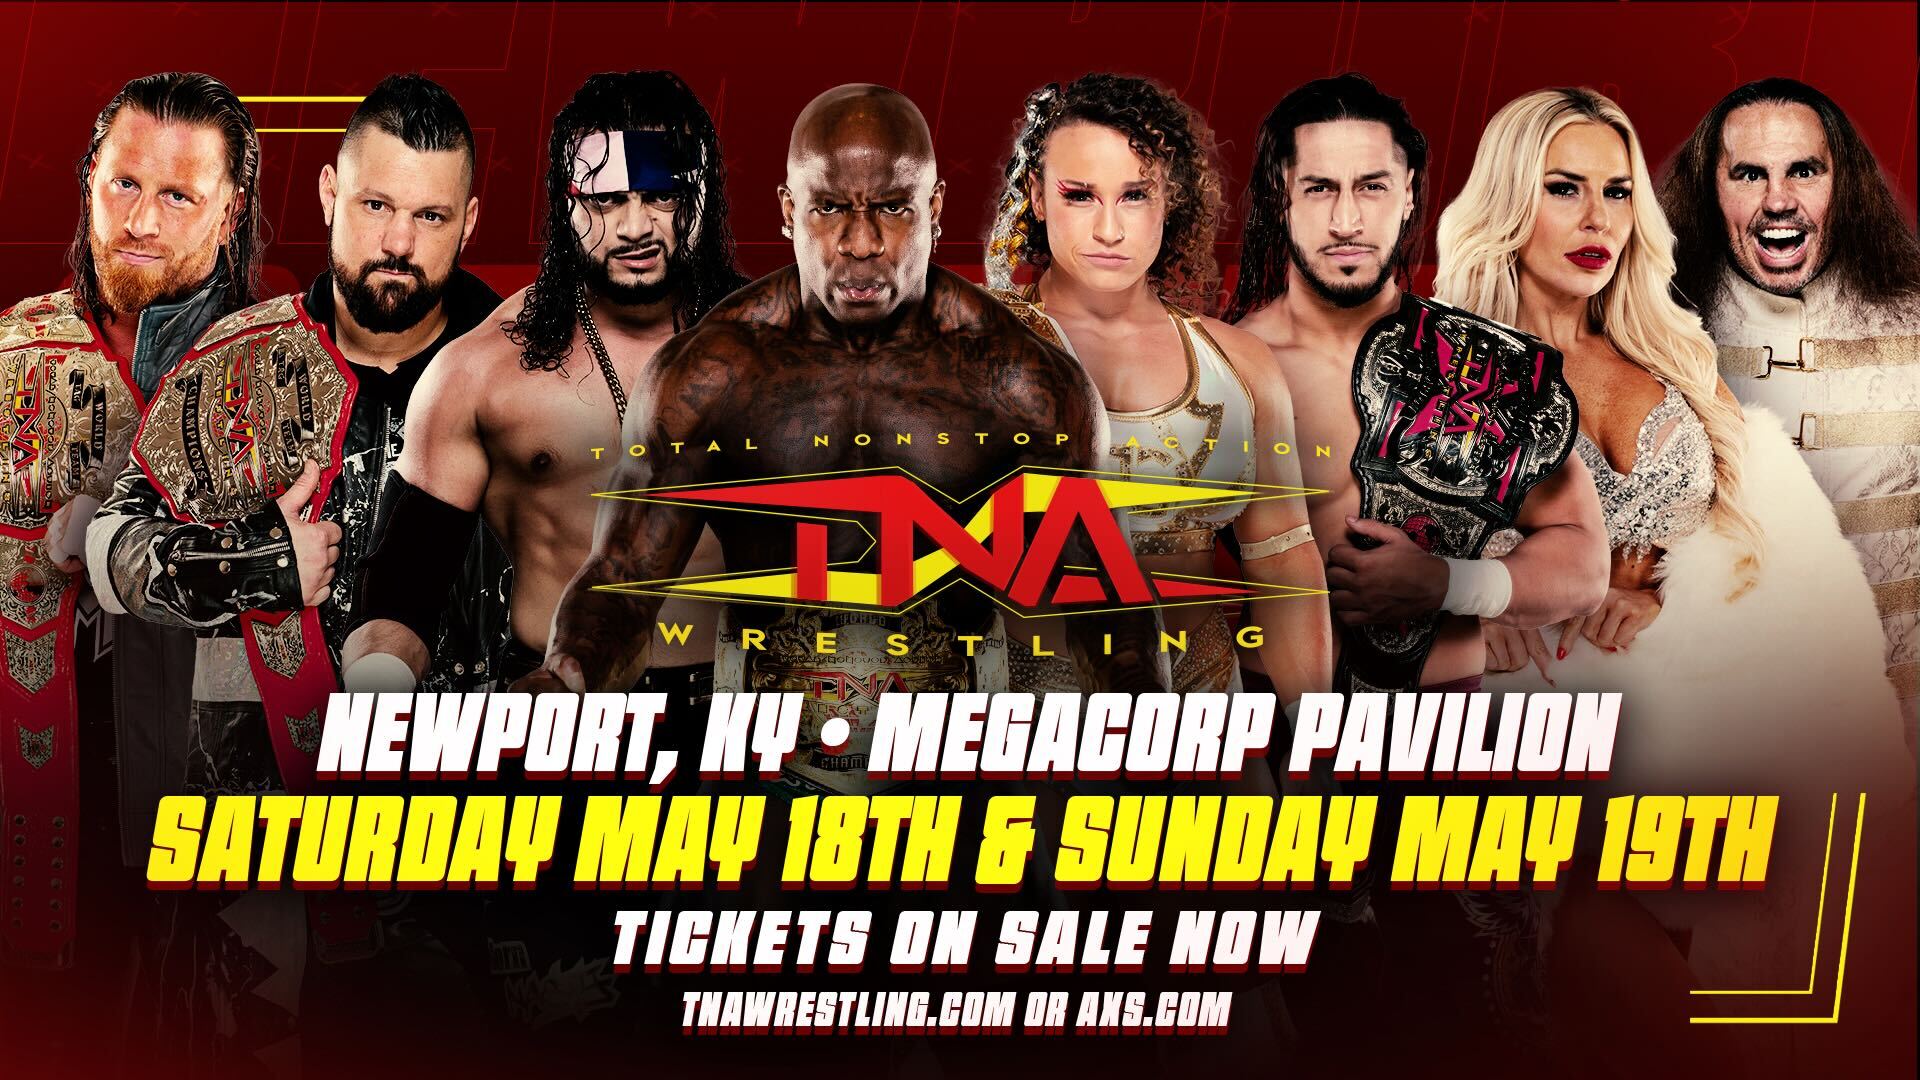 Titanium Ticket Package Details for TNA iMPACT! in the Greater Cincinnati Area – TNA Wrestling